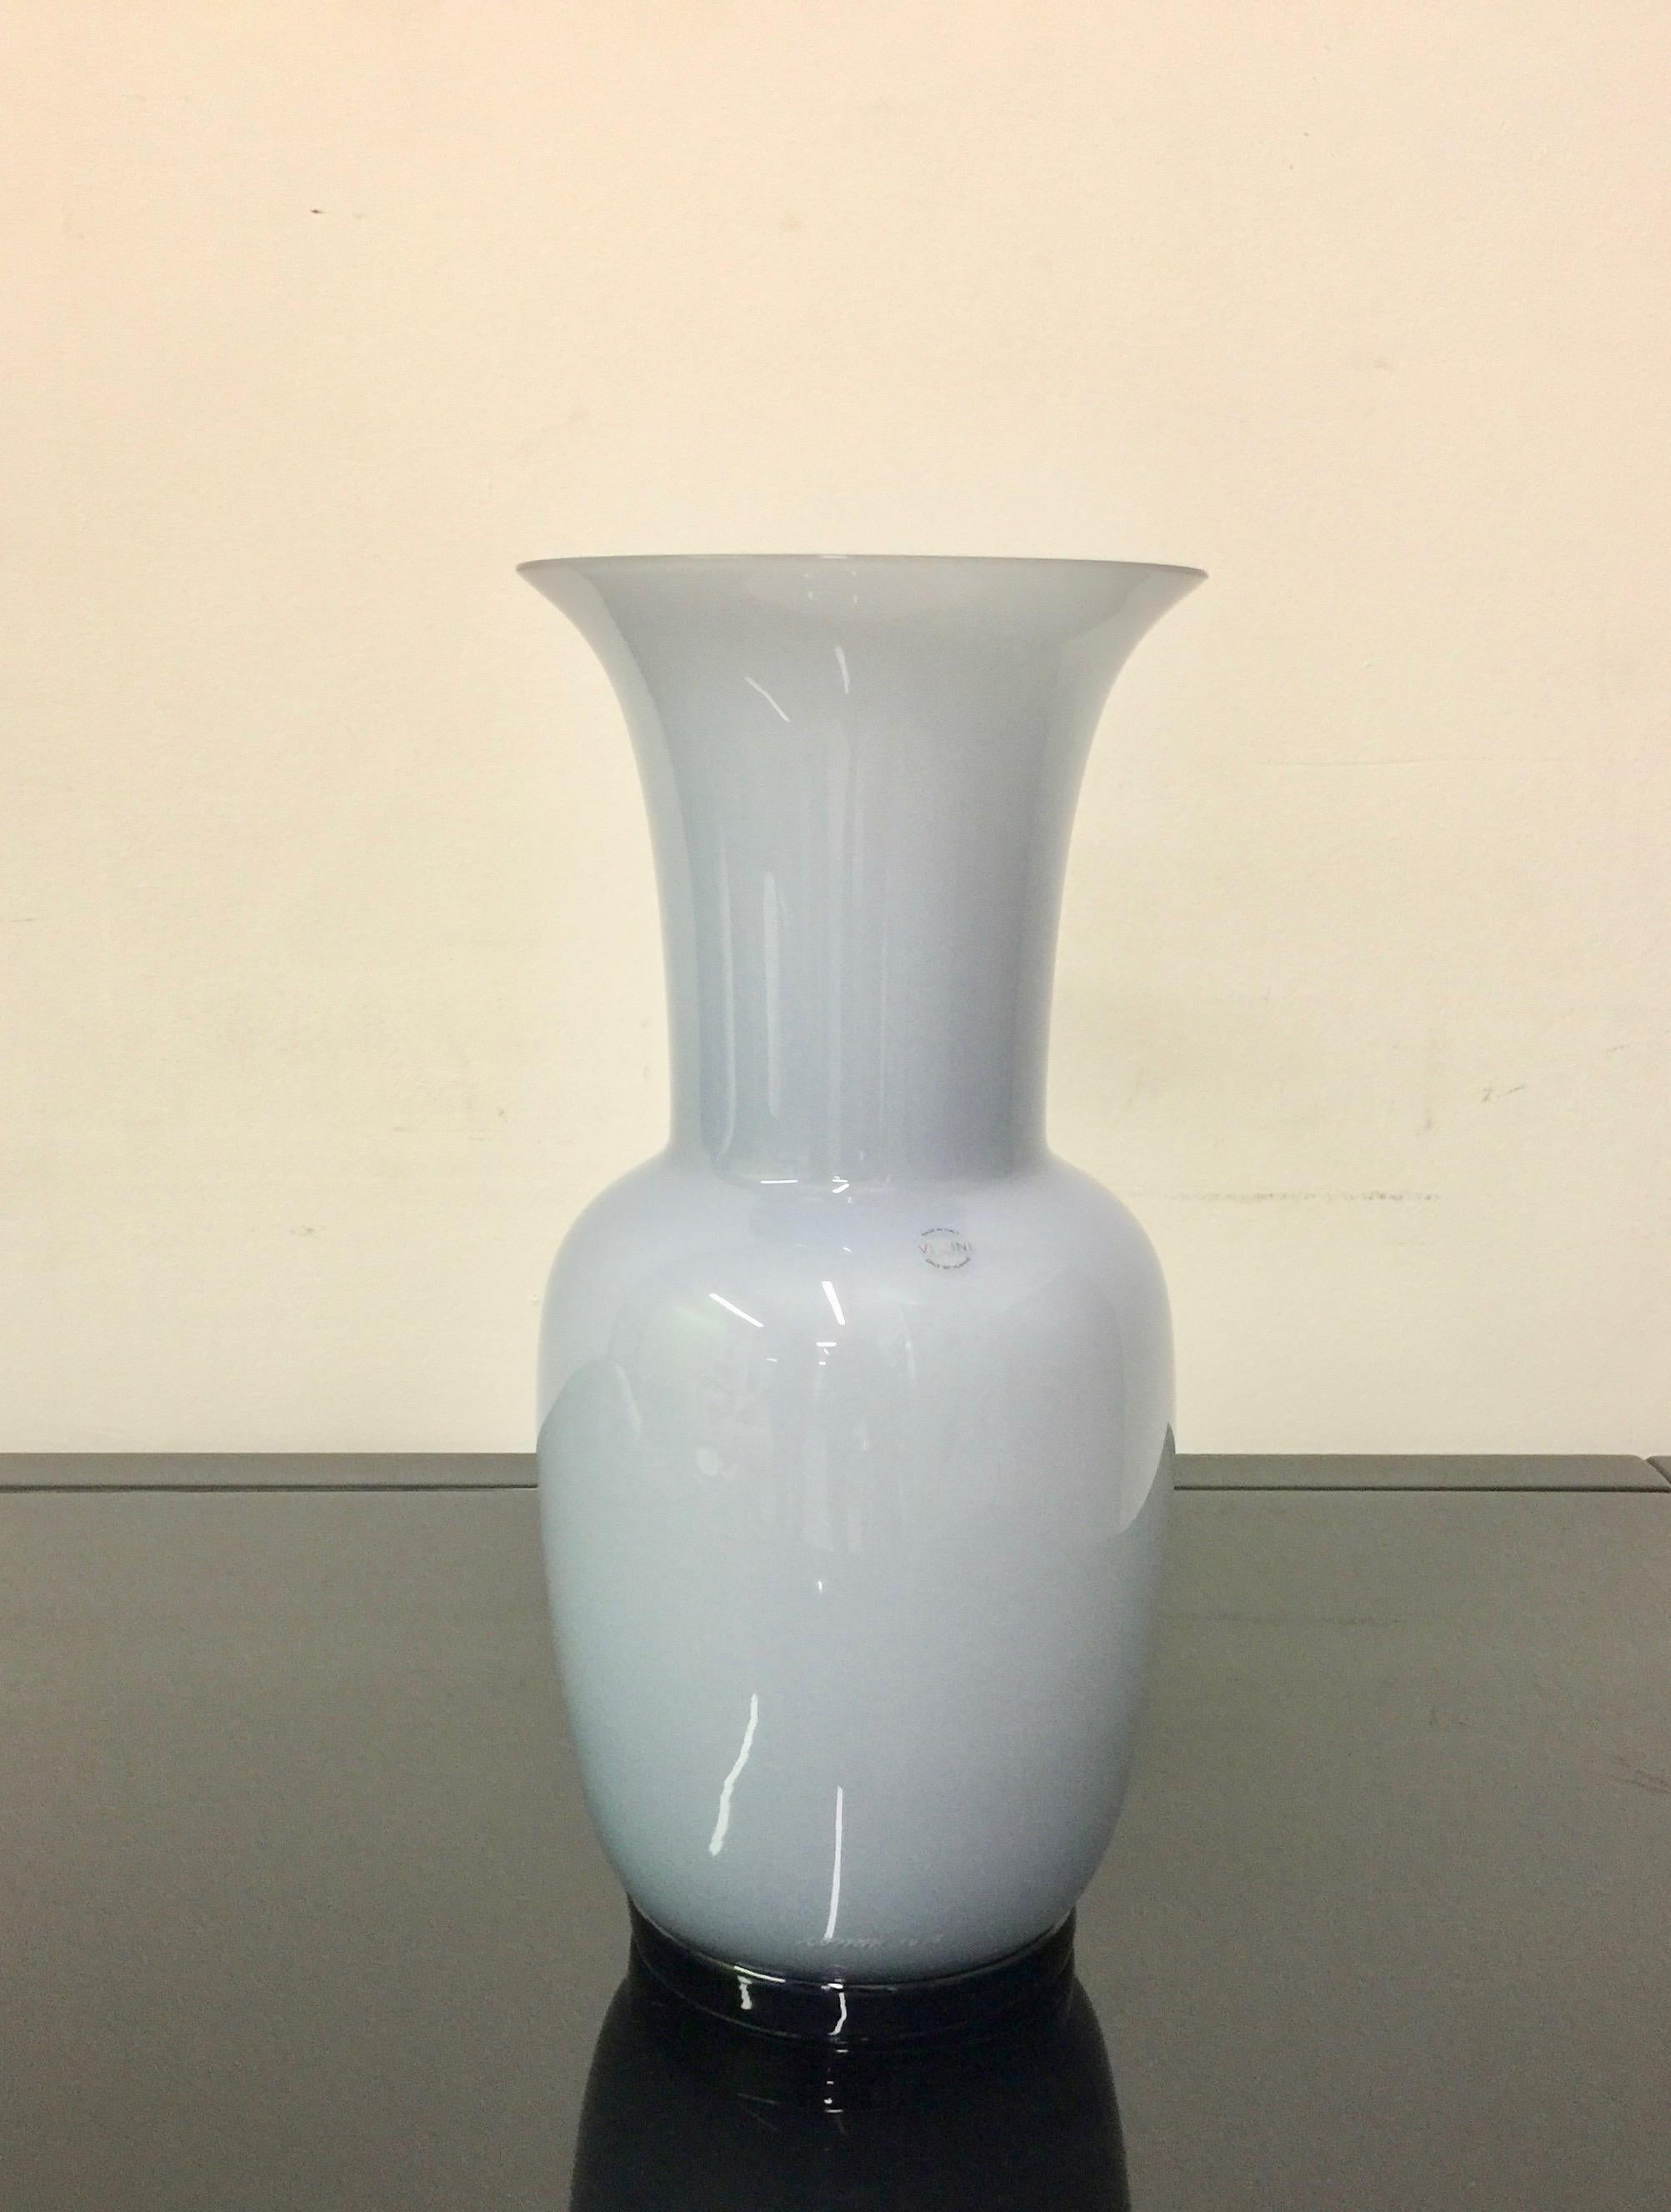 Murano glass vase by historic Italian Murano Company Venini. Classic glass vases 'Opalini' extra-large vase in a lovely dove gray color with white insides. This color is pure bliss, imagine to combine these vases at the centre of your accent or main